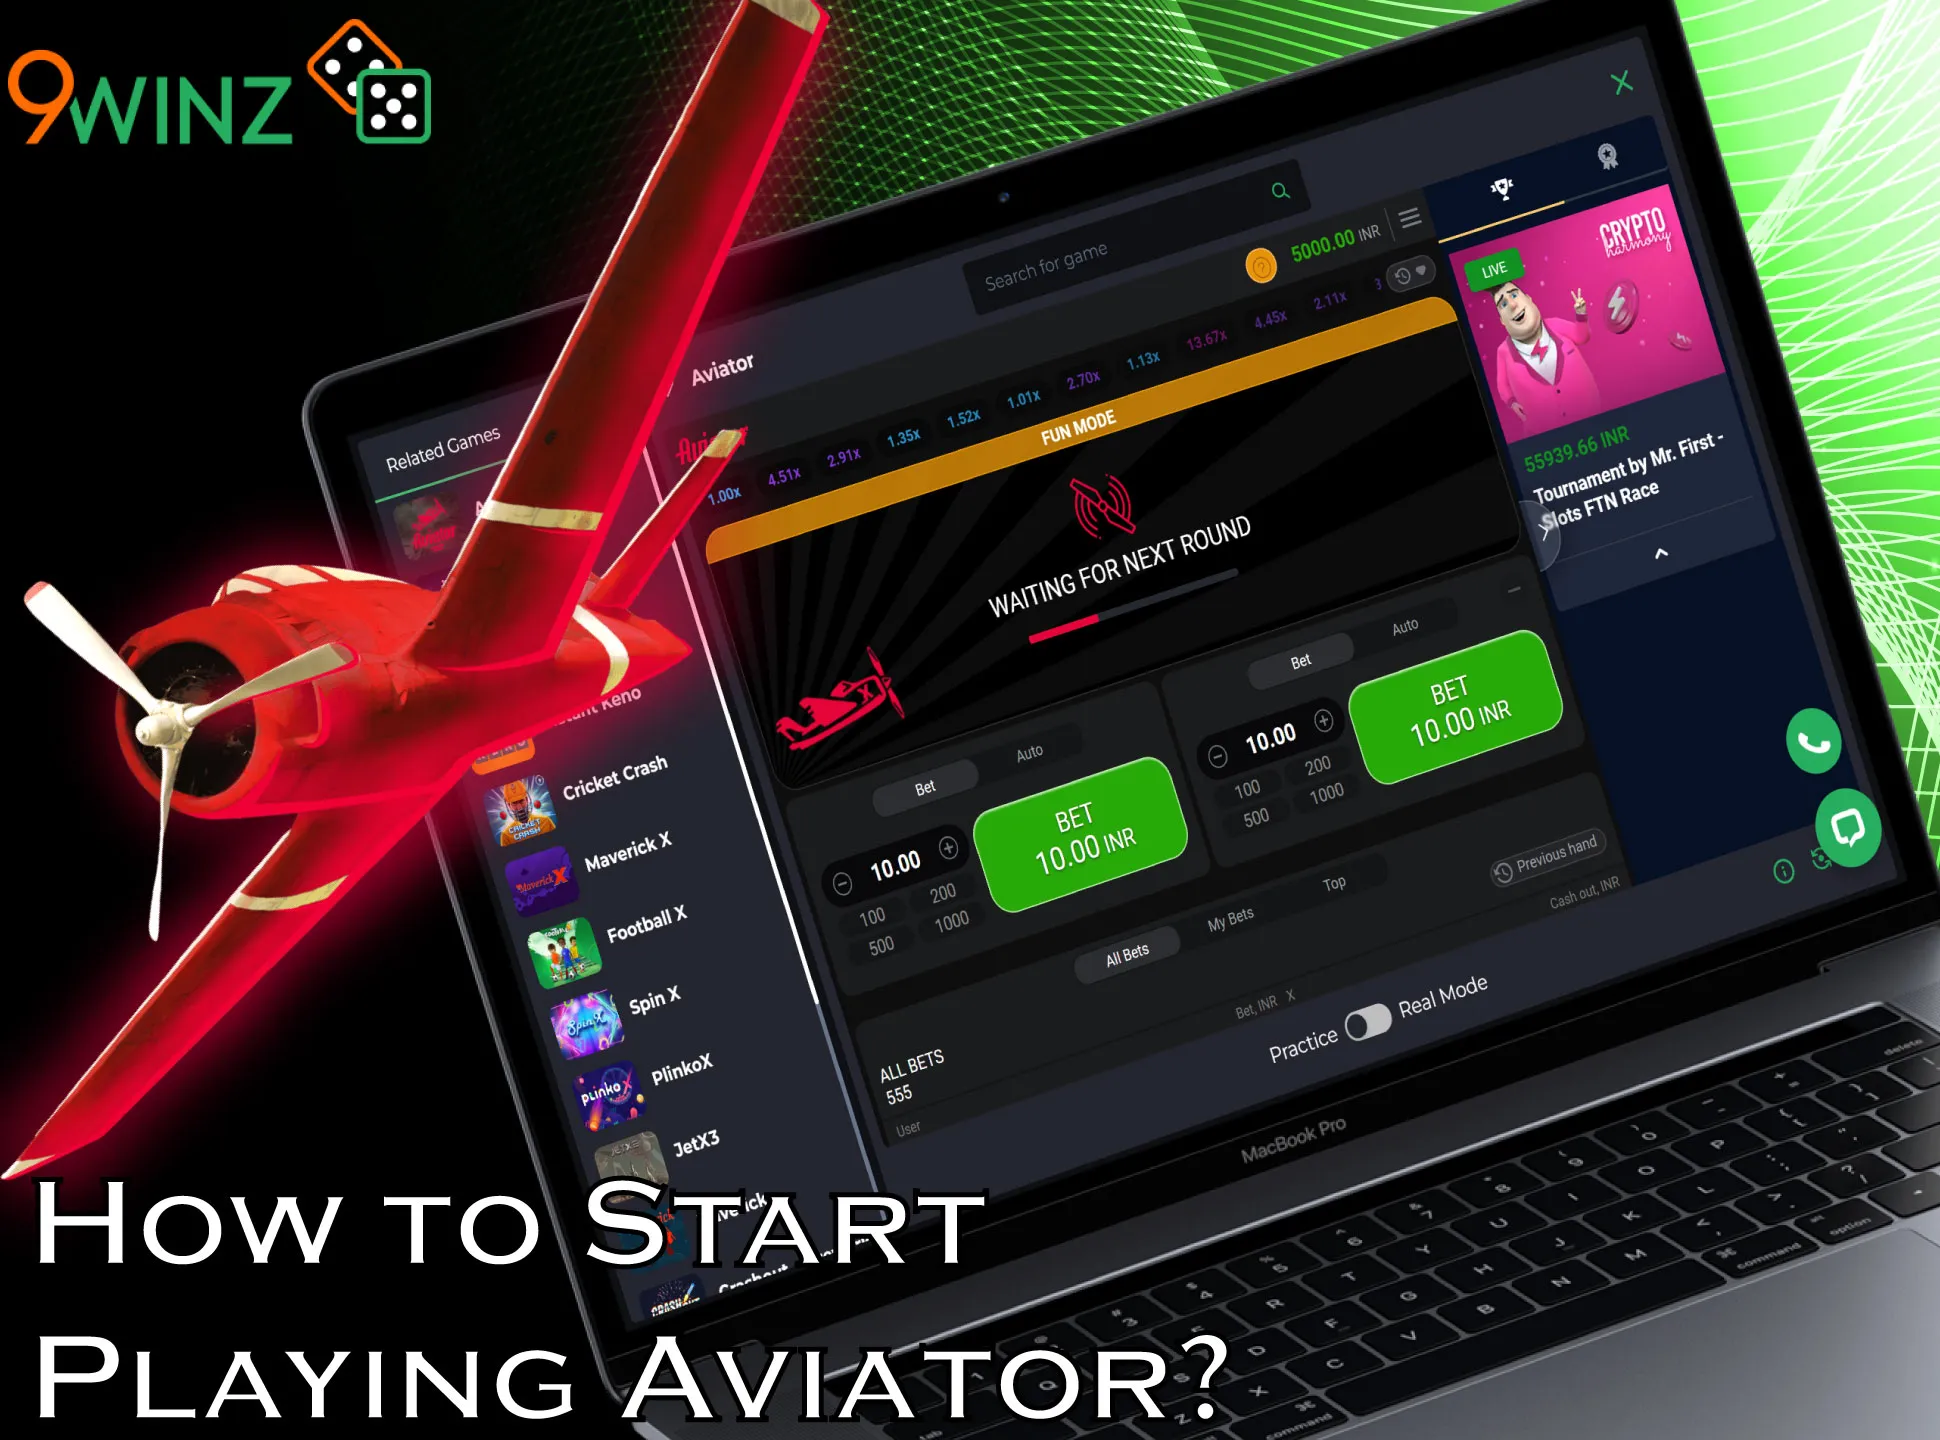 Create an account on 9winz, top it up and go to the casino section to start playing Aviator.